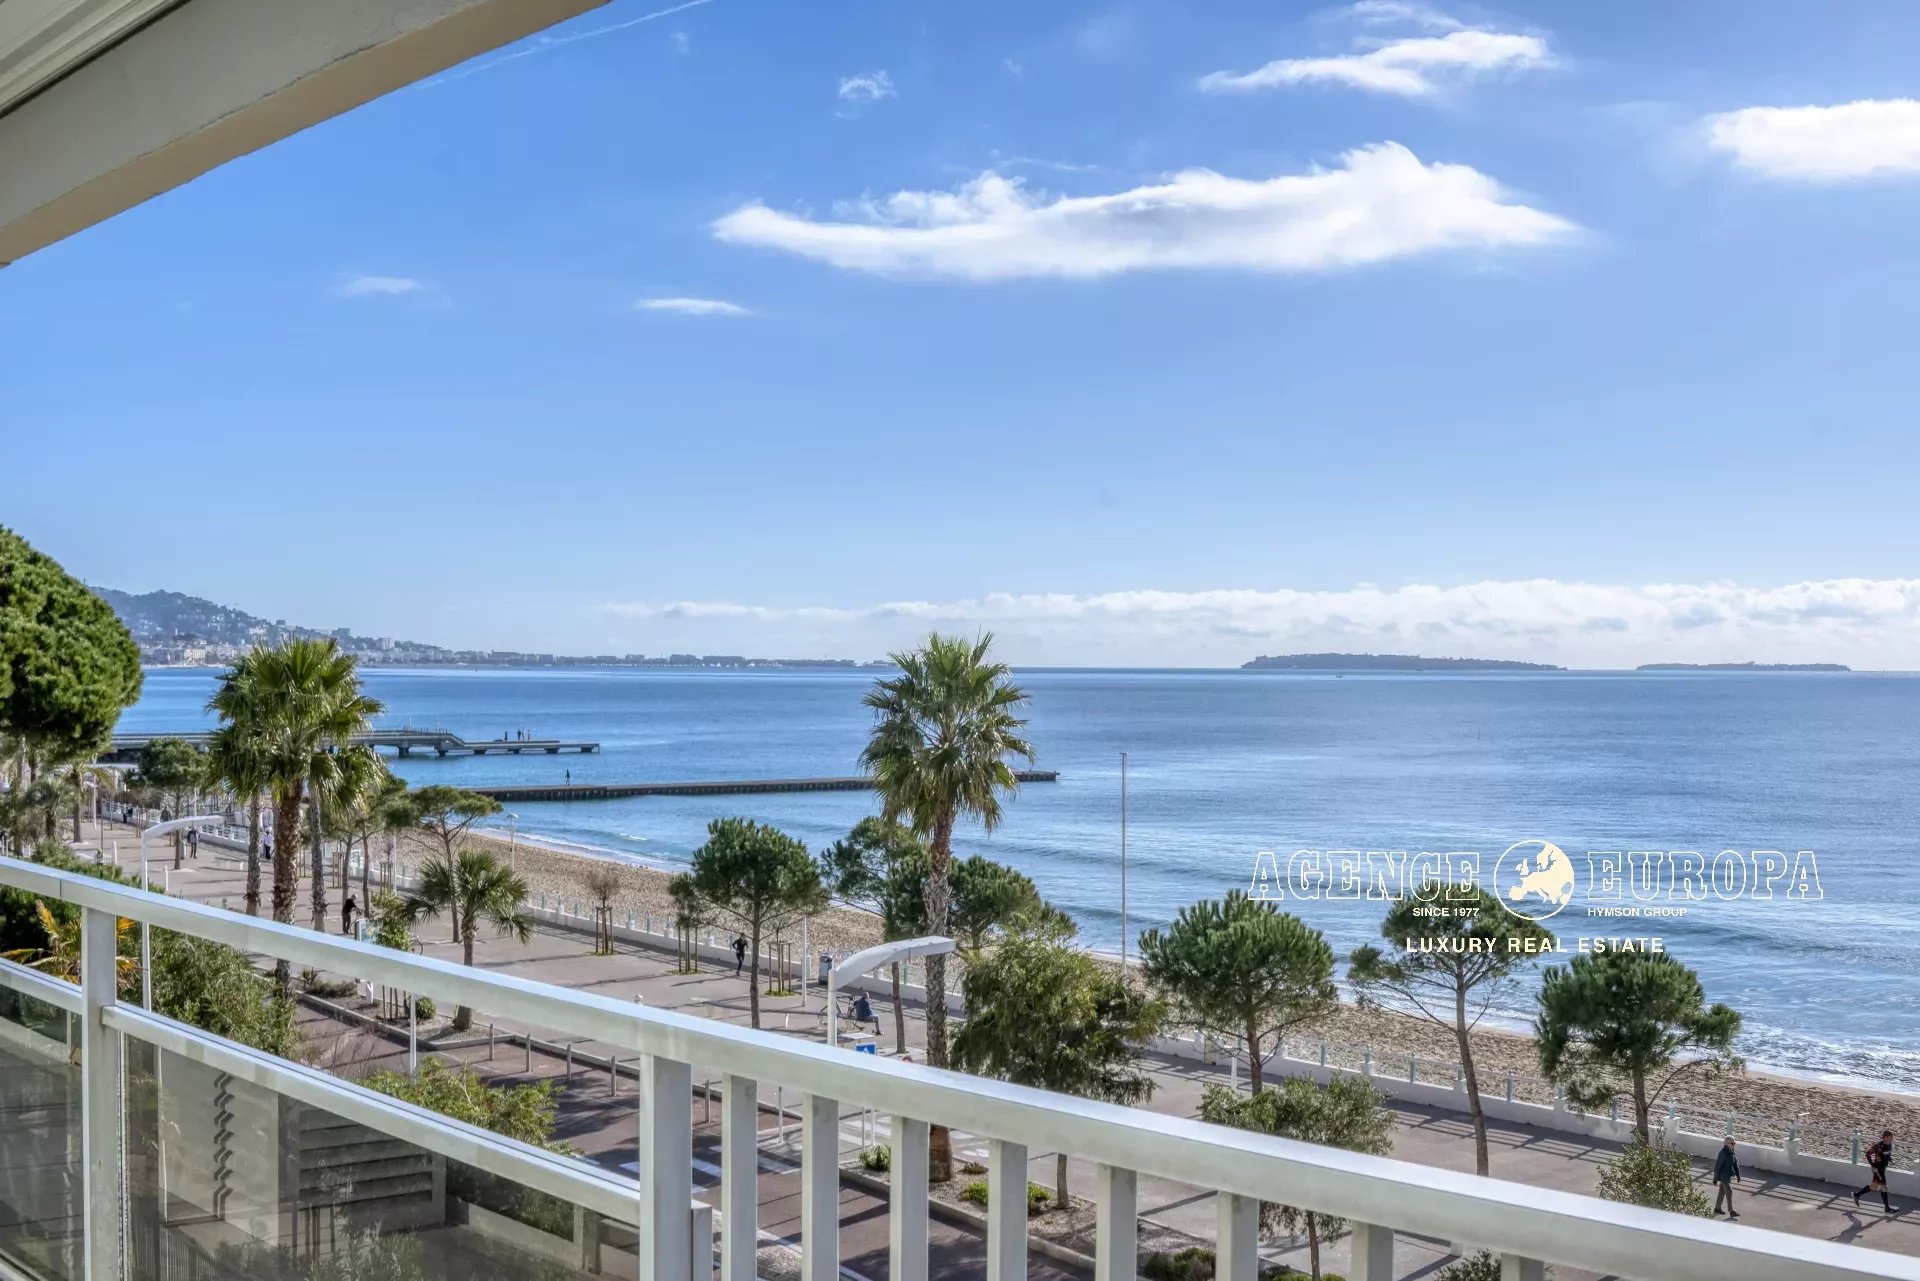 CANNES "PLAGES DU MIDI" - PANORAMIC SEA VIEW